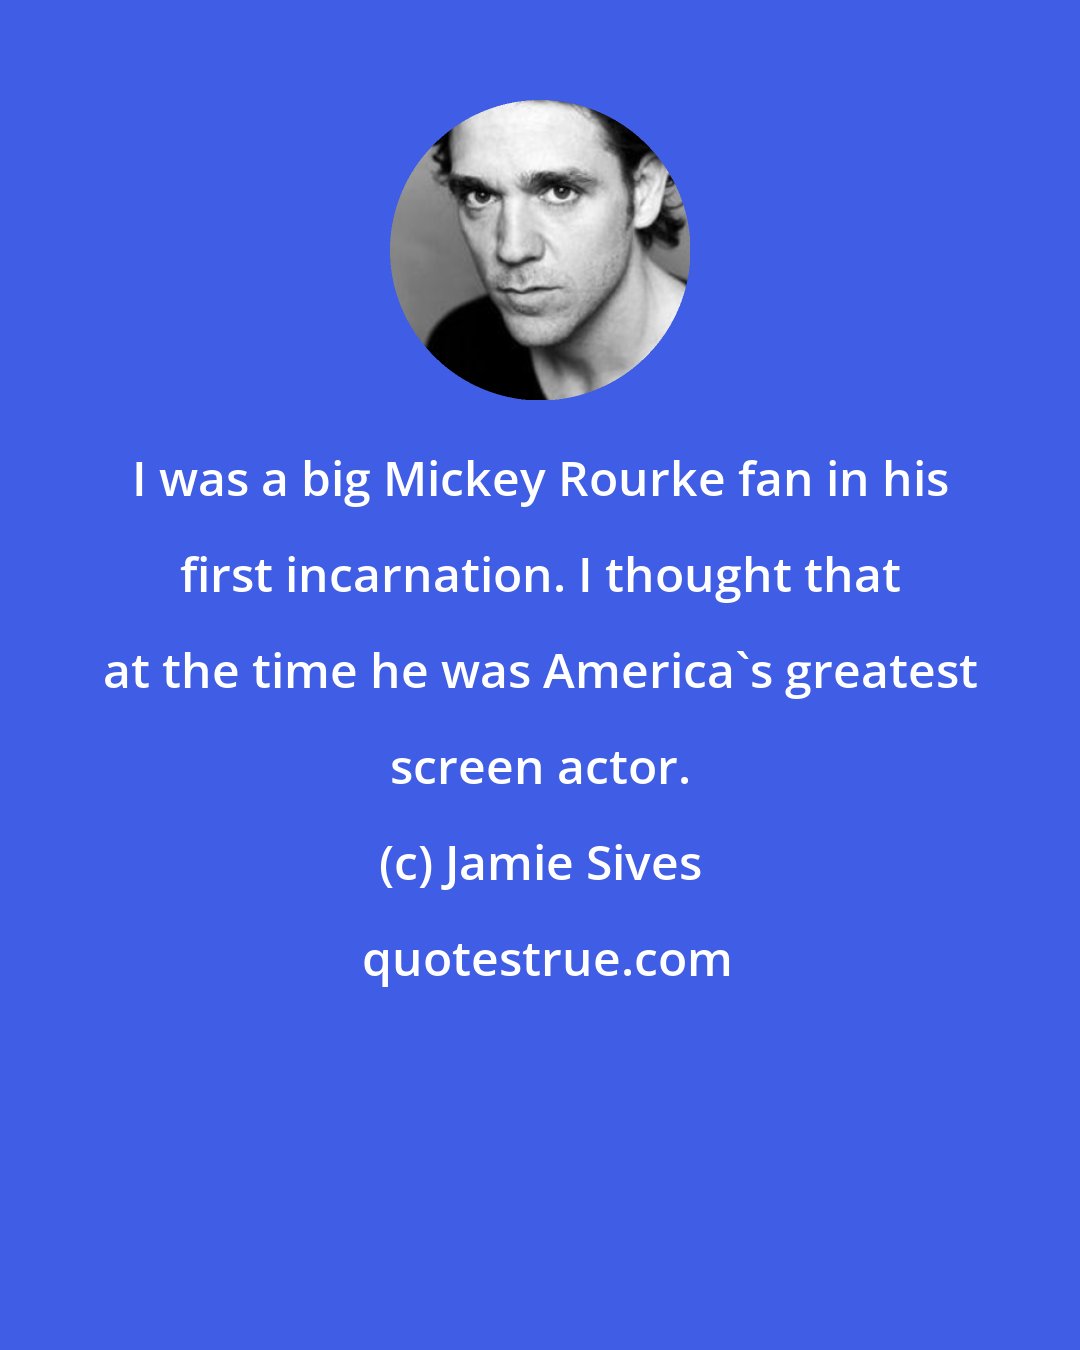 Jamie Sives: I was a big Mickey Rourke fan in his first incarnation. I thought that at the time he was America's greatest screen actor.